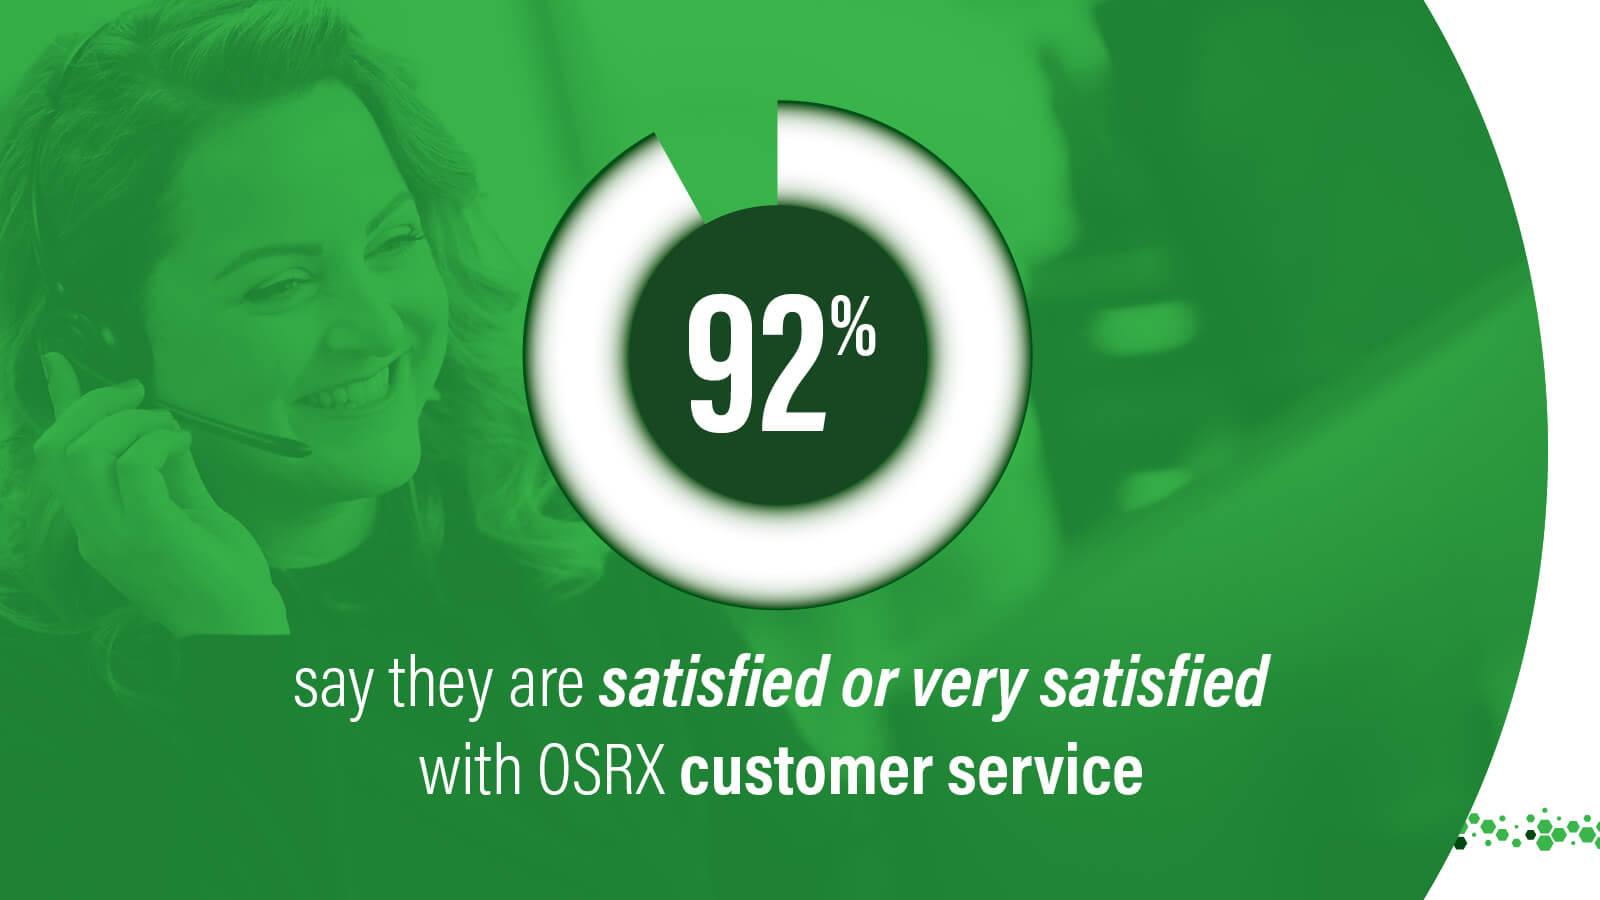 92% say they are satisfied or very satisfied with OSRX customer service